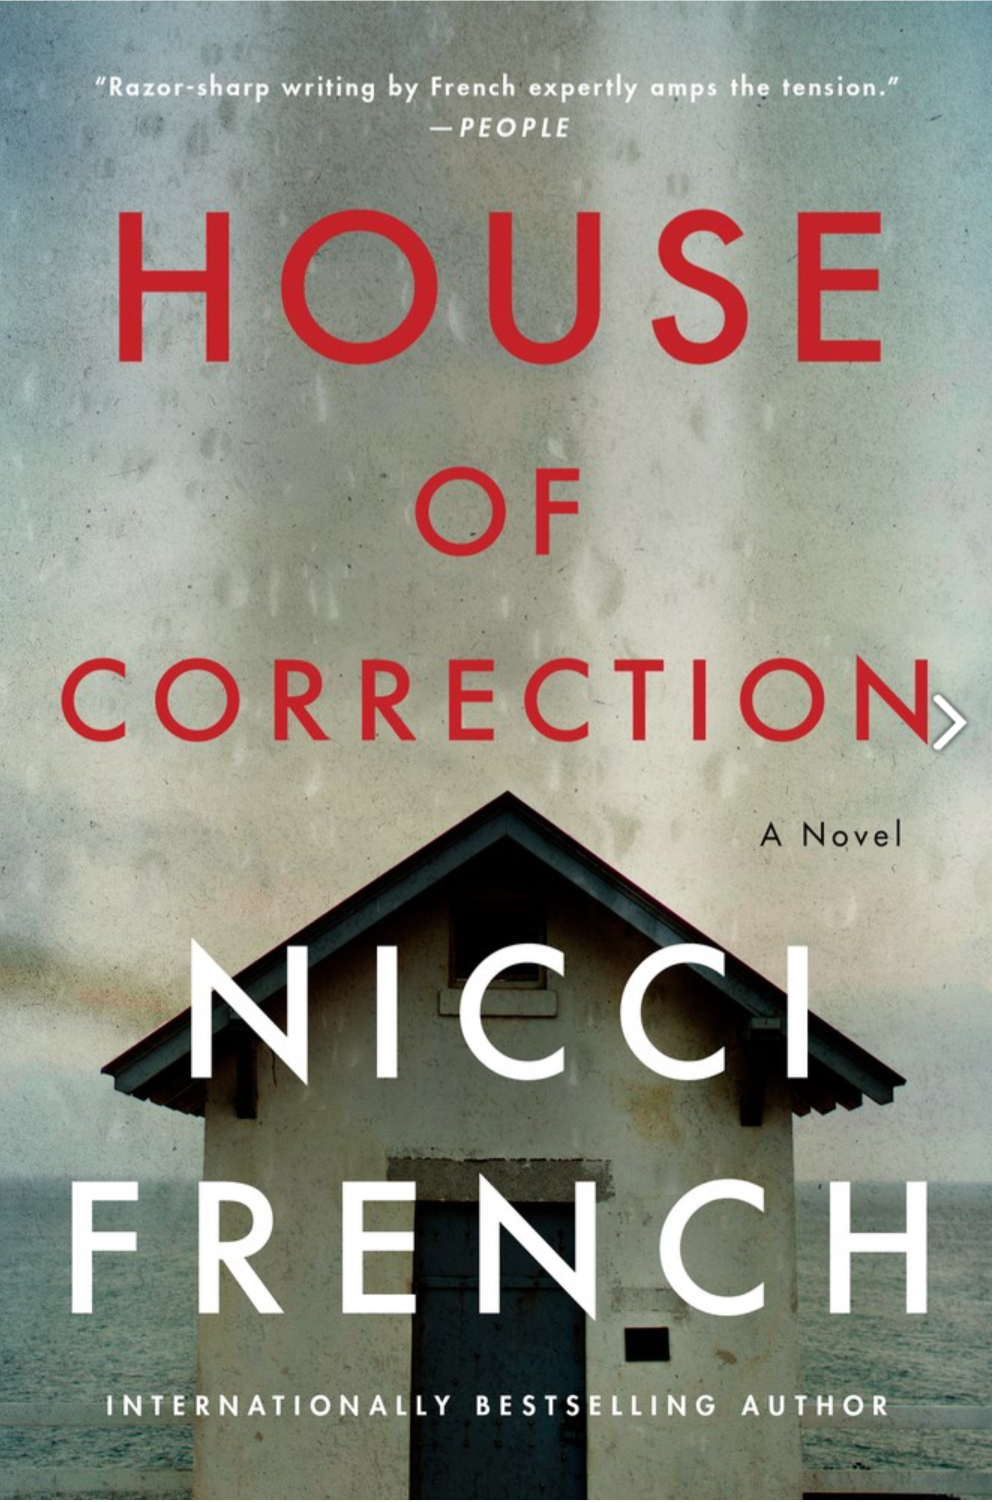 Review: House of Correction by Nicci French